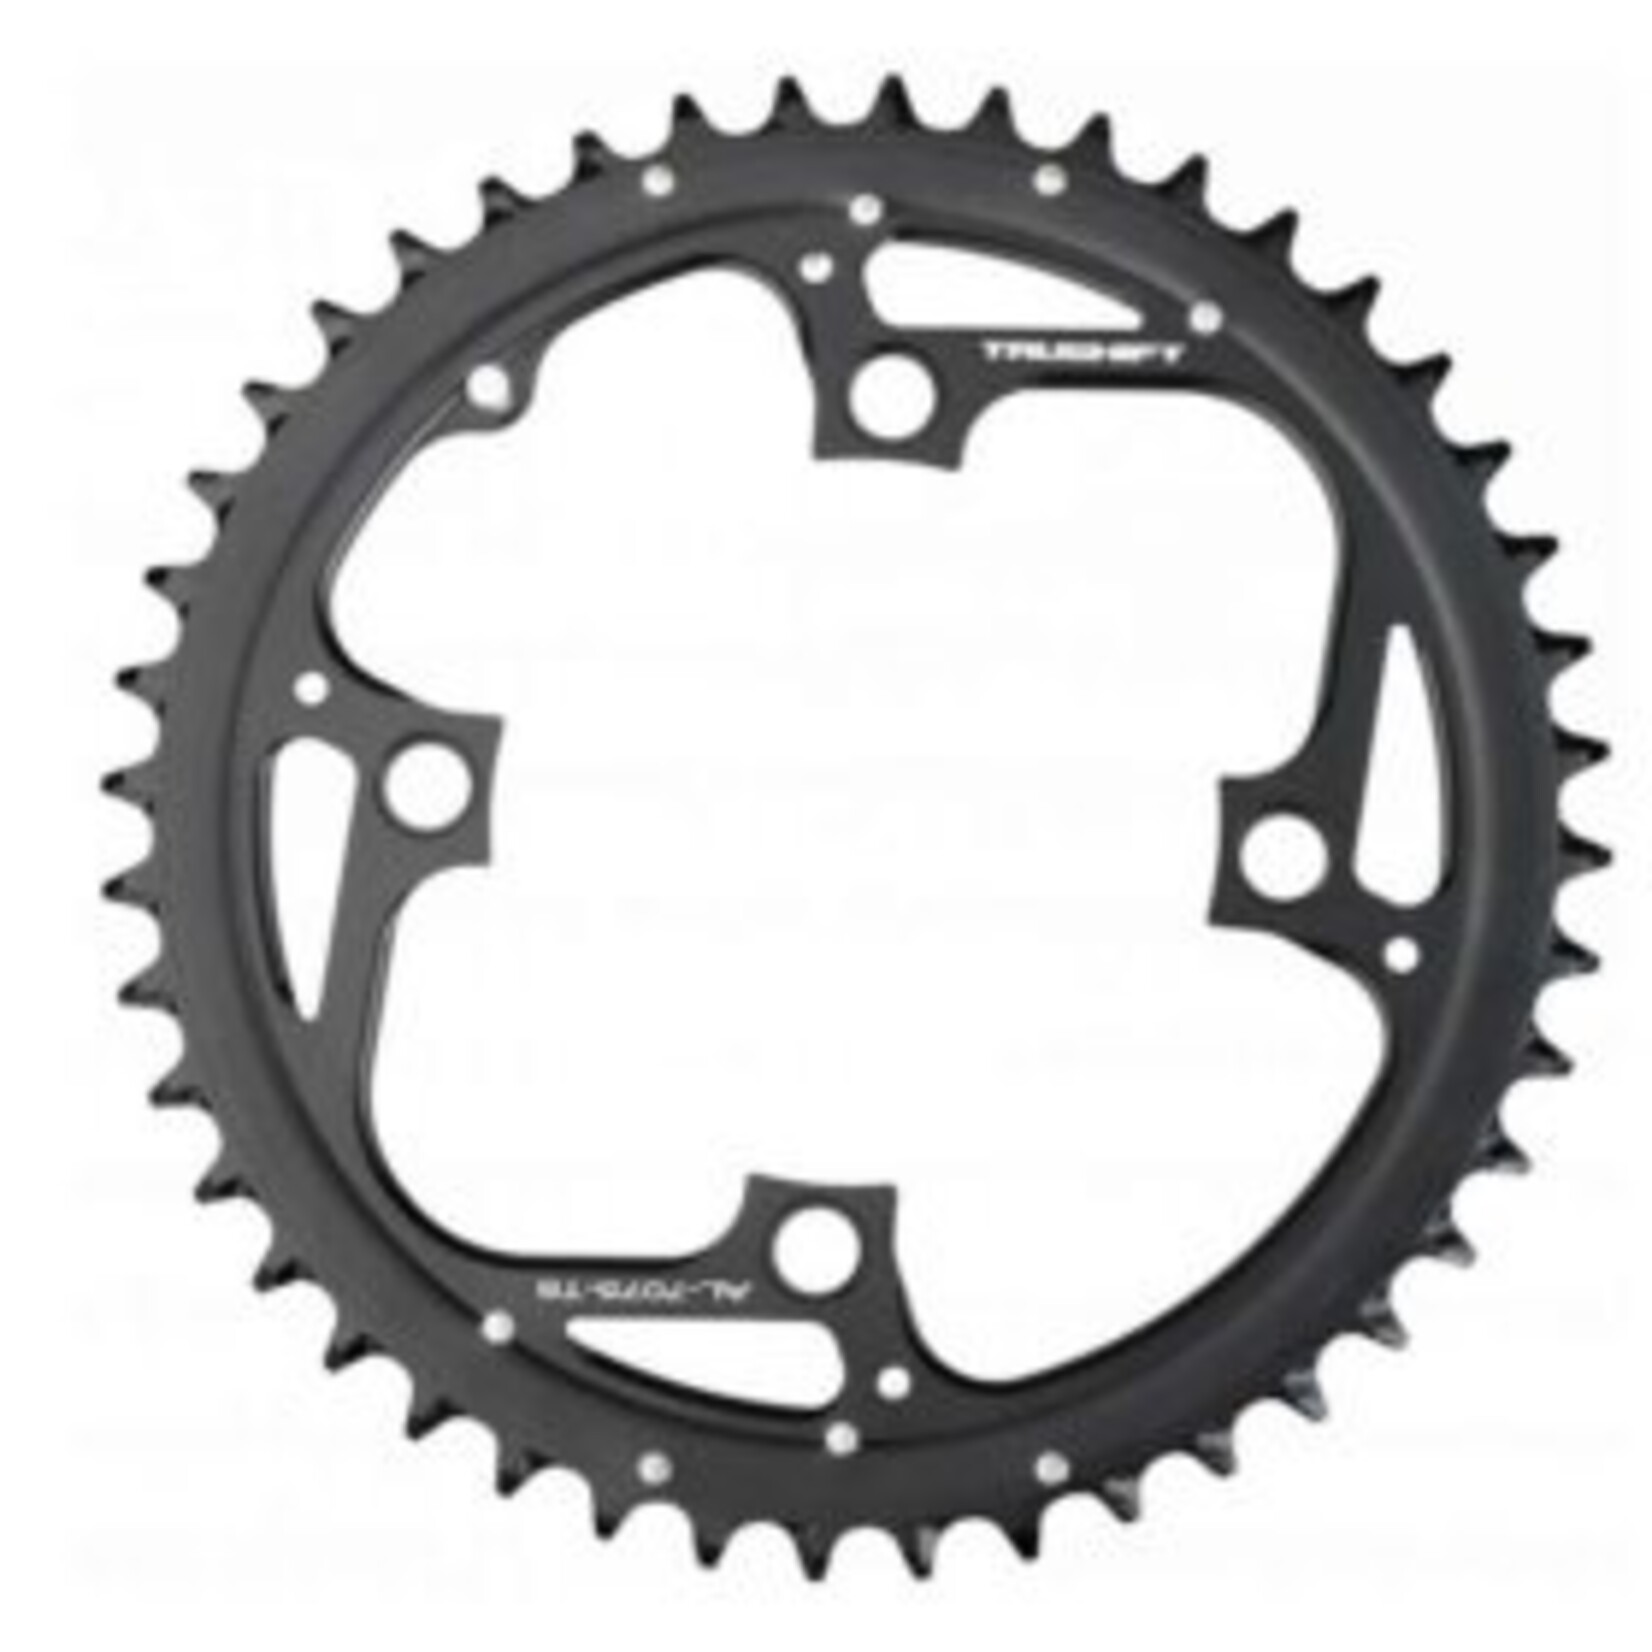 Truvativ Outer Chainring, 44 Tooth, 4 Bolt